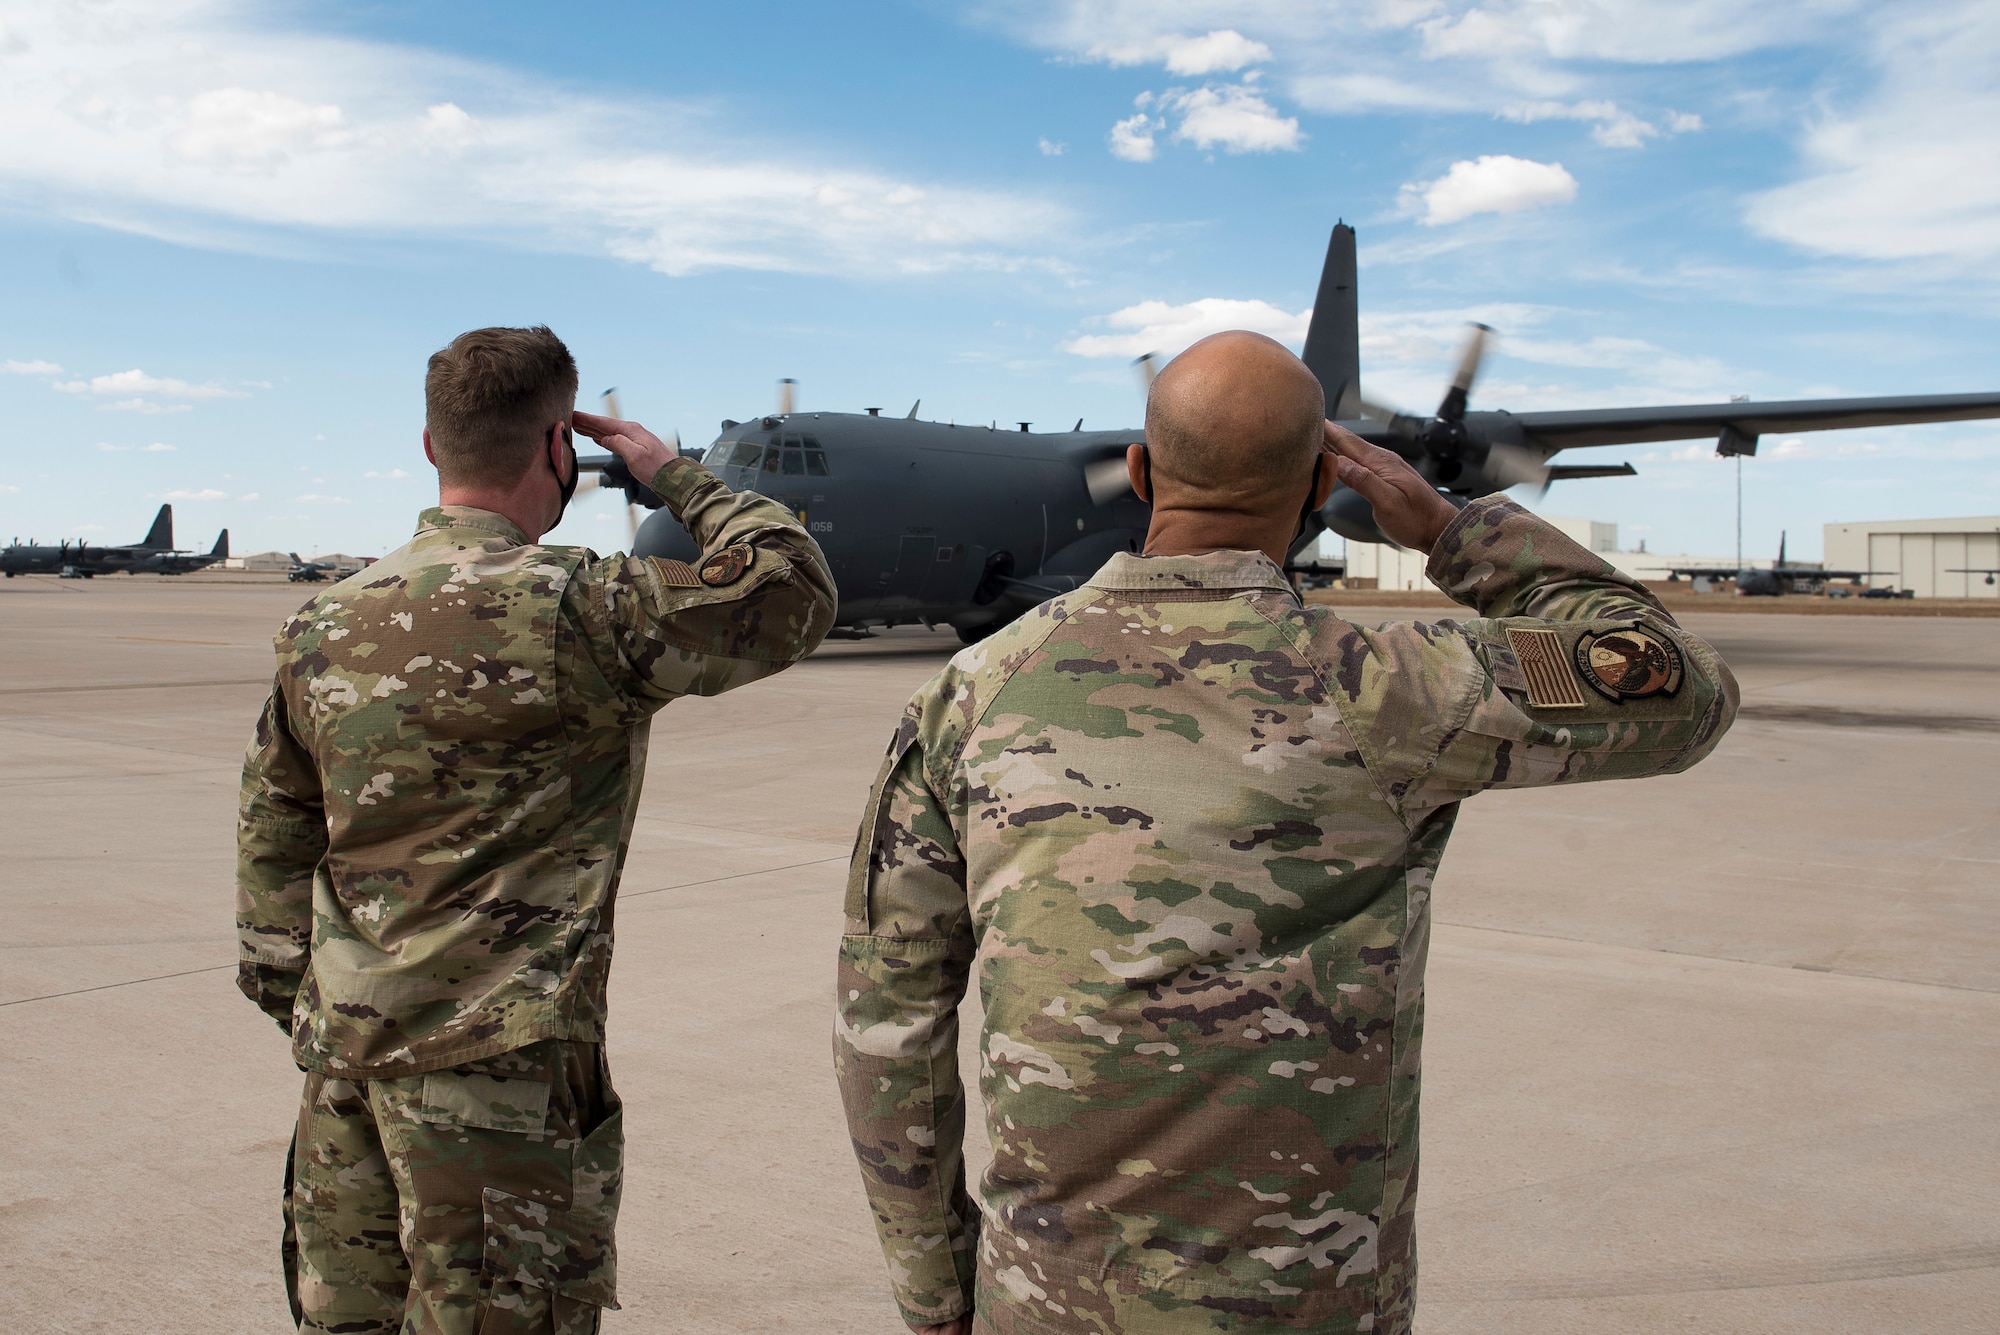 Lt. Col. Kris Airkens, 551st Special Operations Squadron commander, and Senior Master Sgt. Aaron Drain, 551 SOS senior enlisted leader, salute an AC-130W aircraft as it pulls in after a flight at Cannon Air Force Base, N.M., April 29, 2021. The squadron, a tenant unit of the 492nd Special Operations Wing, has been at Cannon since July 24, 2009, after its reactivation. (U.S. Air Force photo by Senior Airman Vernon R. Walter III)